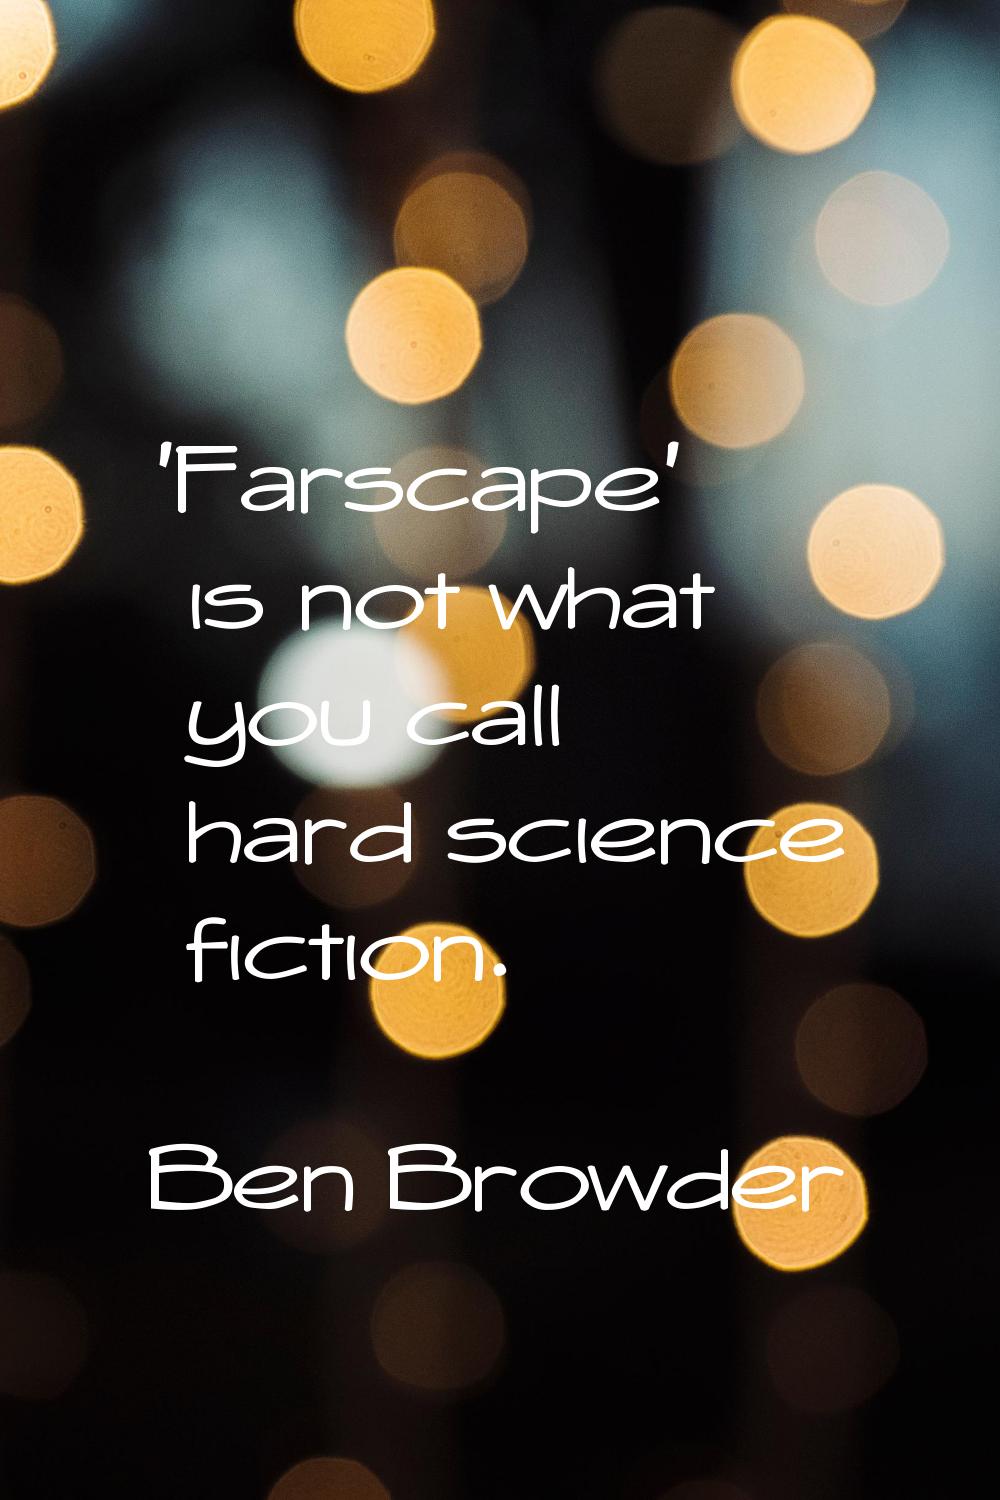 'Farscape' is not what you call hard science fiction.